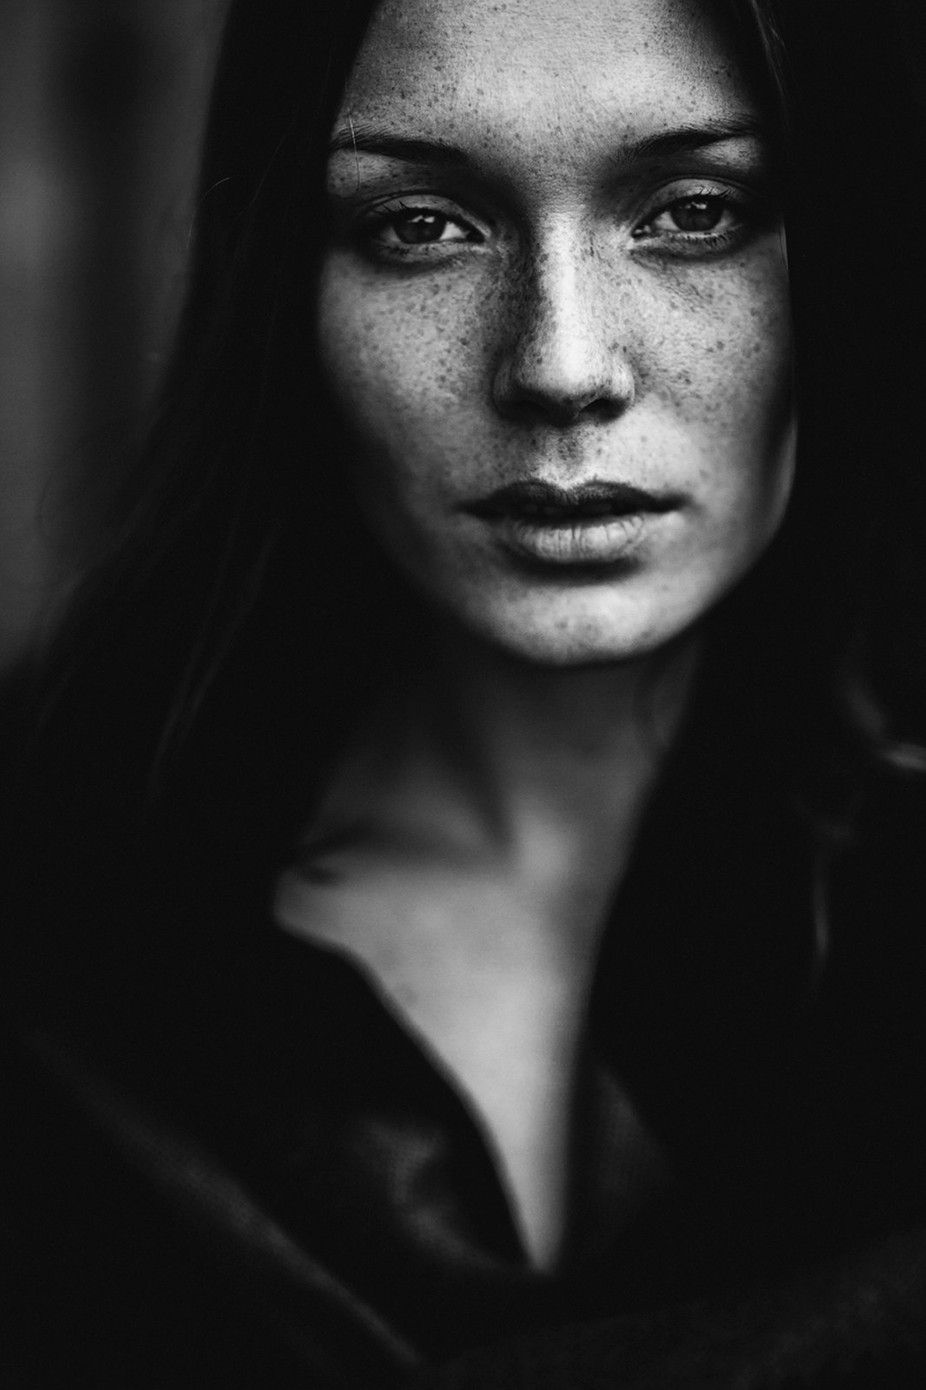 Rosa  by yannickdesmet - Black and White Portraits Photo Contest